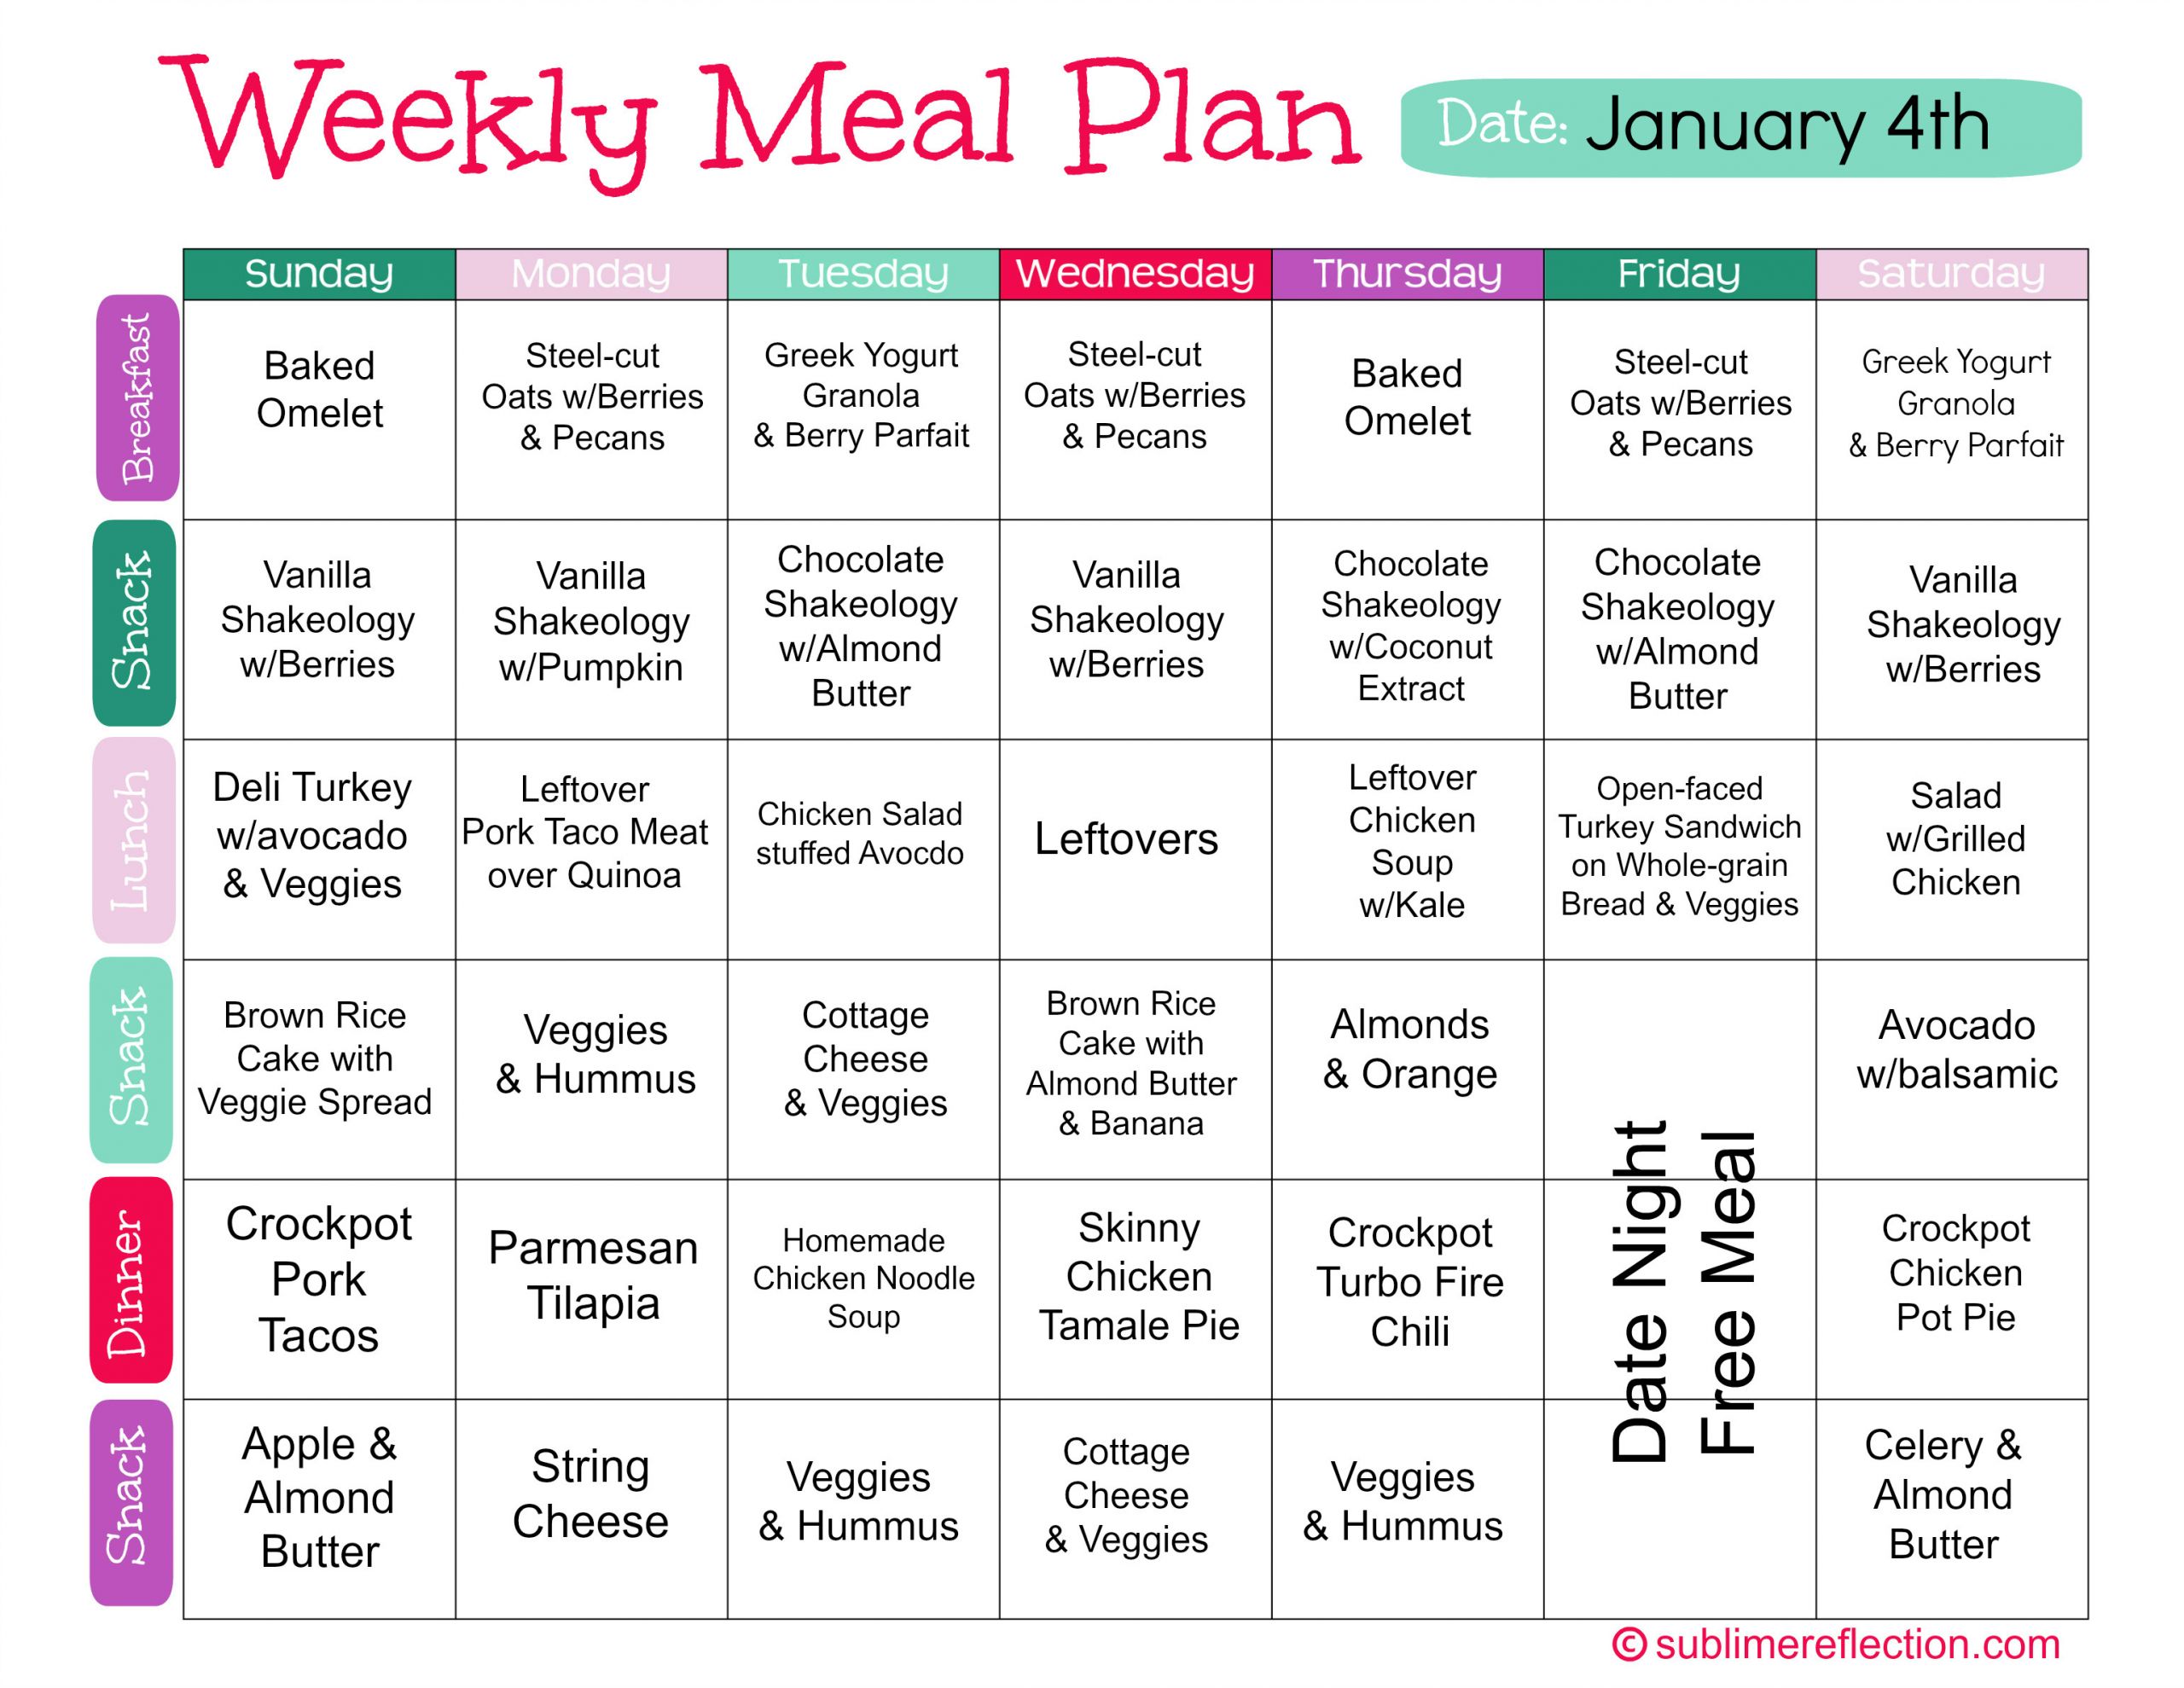 Clean Eating Meal Plans
 Transitioning Your Family to a Clean Eating Meal Plan